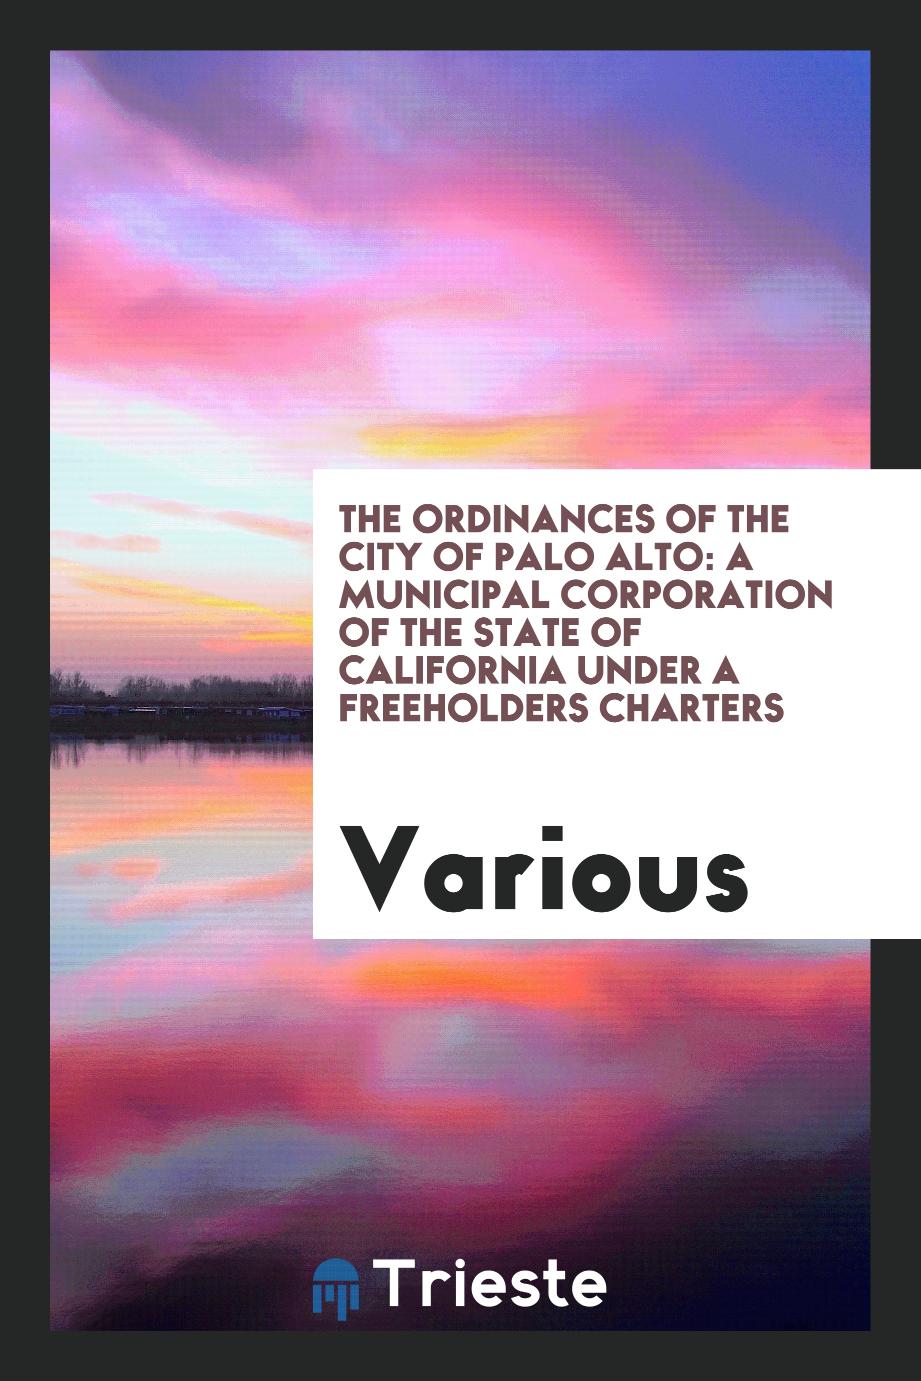 The ordinances of the city of Palo Alto: a municipal corporation of the State of California under a freeholders charters